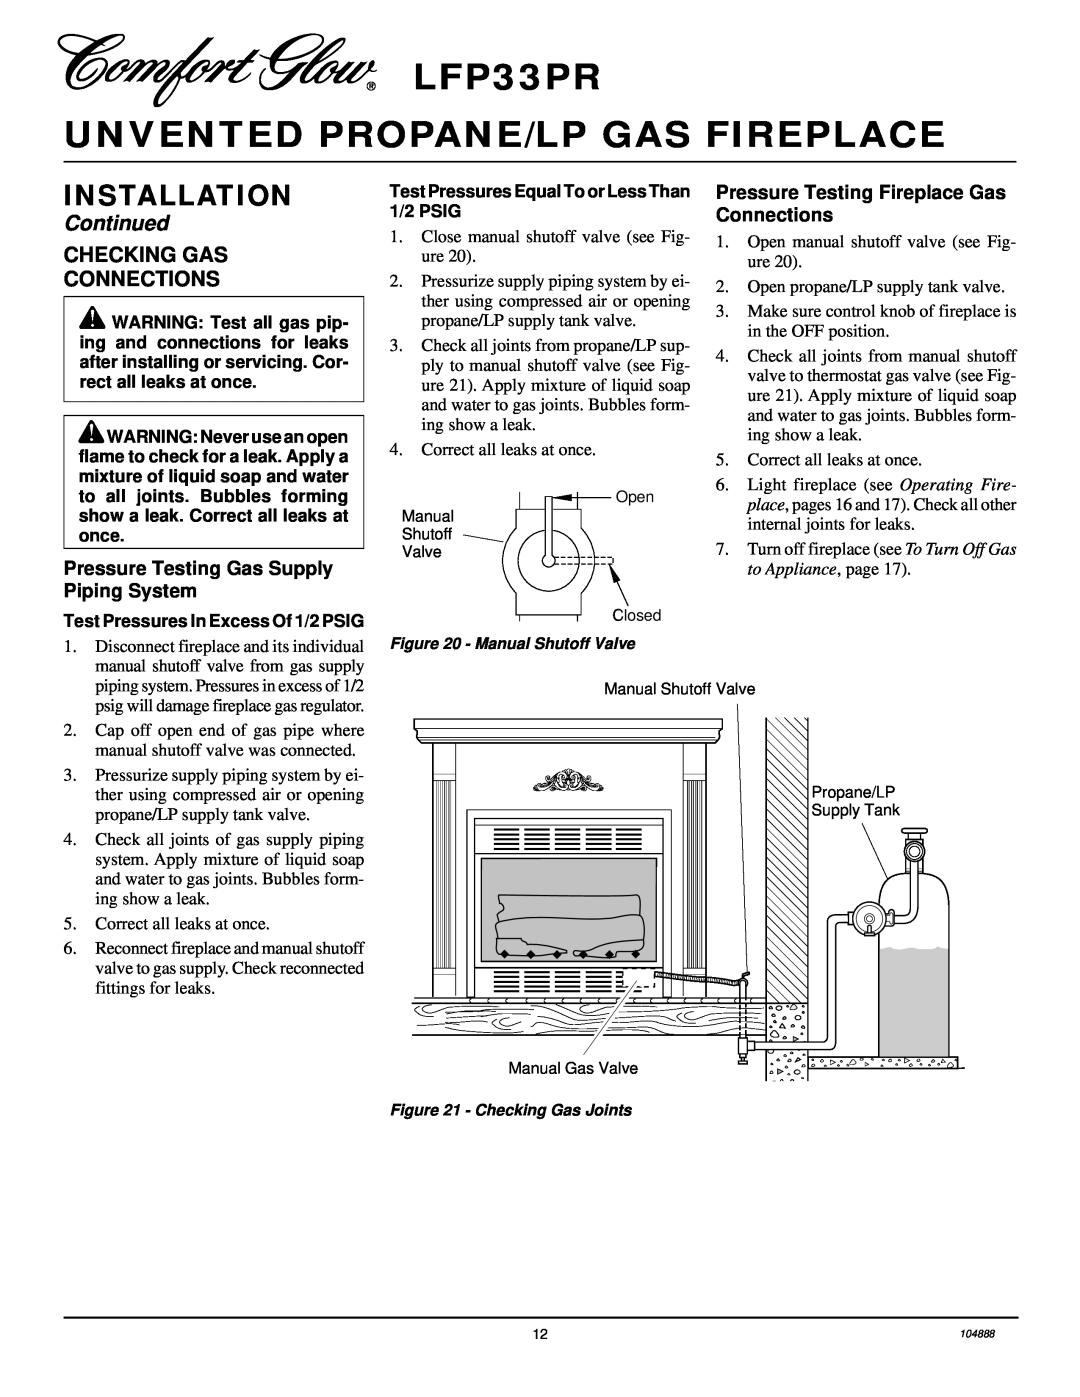 Desa installation manual Checking Gas Connections, LFP33PR UNVENTED PROPANE/LP GAS FIREPLACE, Installation, Continued 